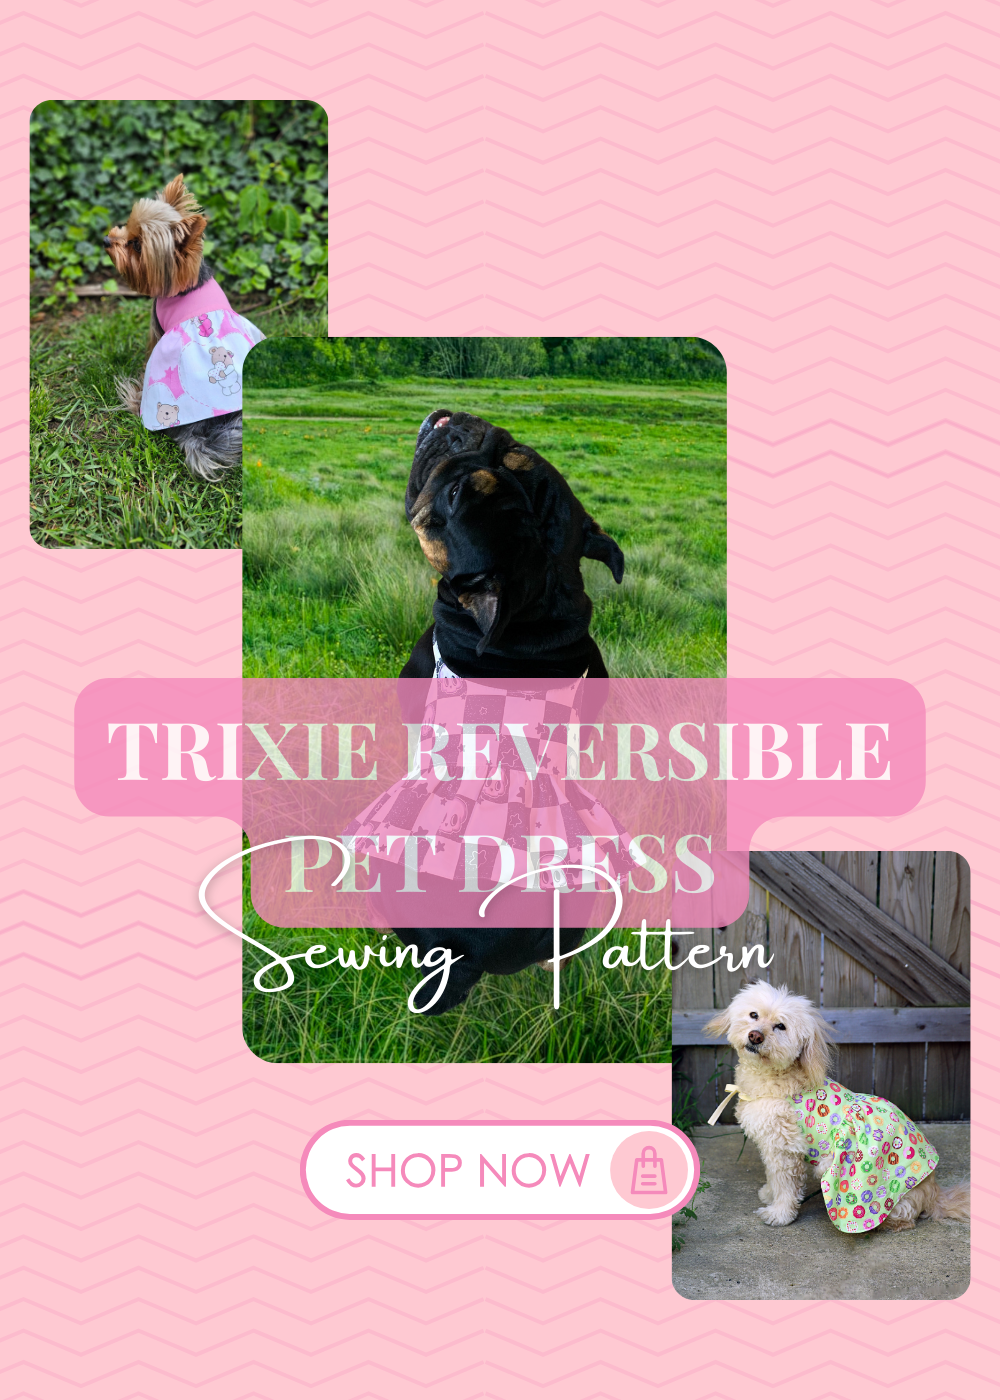 Pet Dress Sewing Pattern for beginners by Ellie and Mac Sewing Patterns